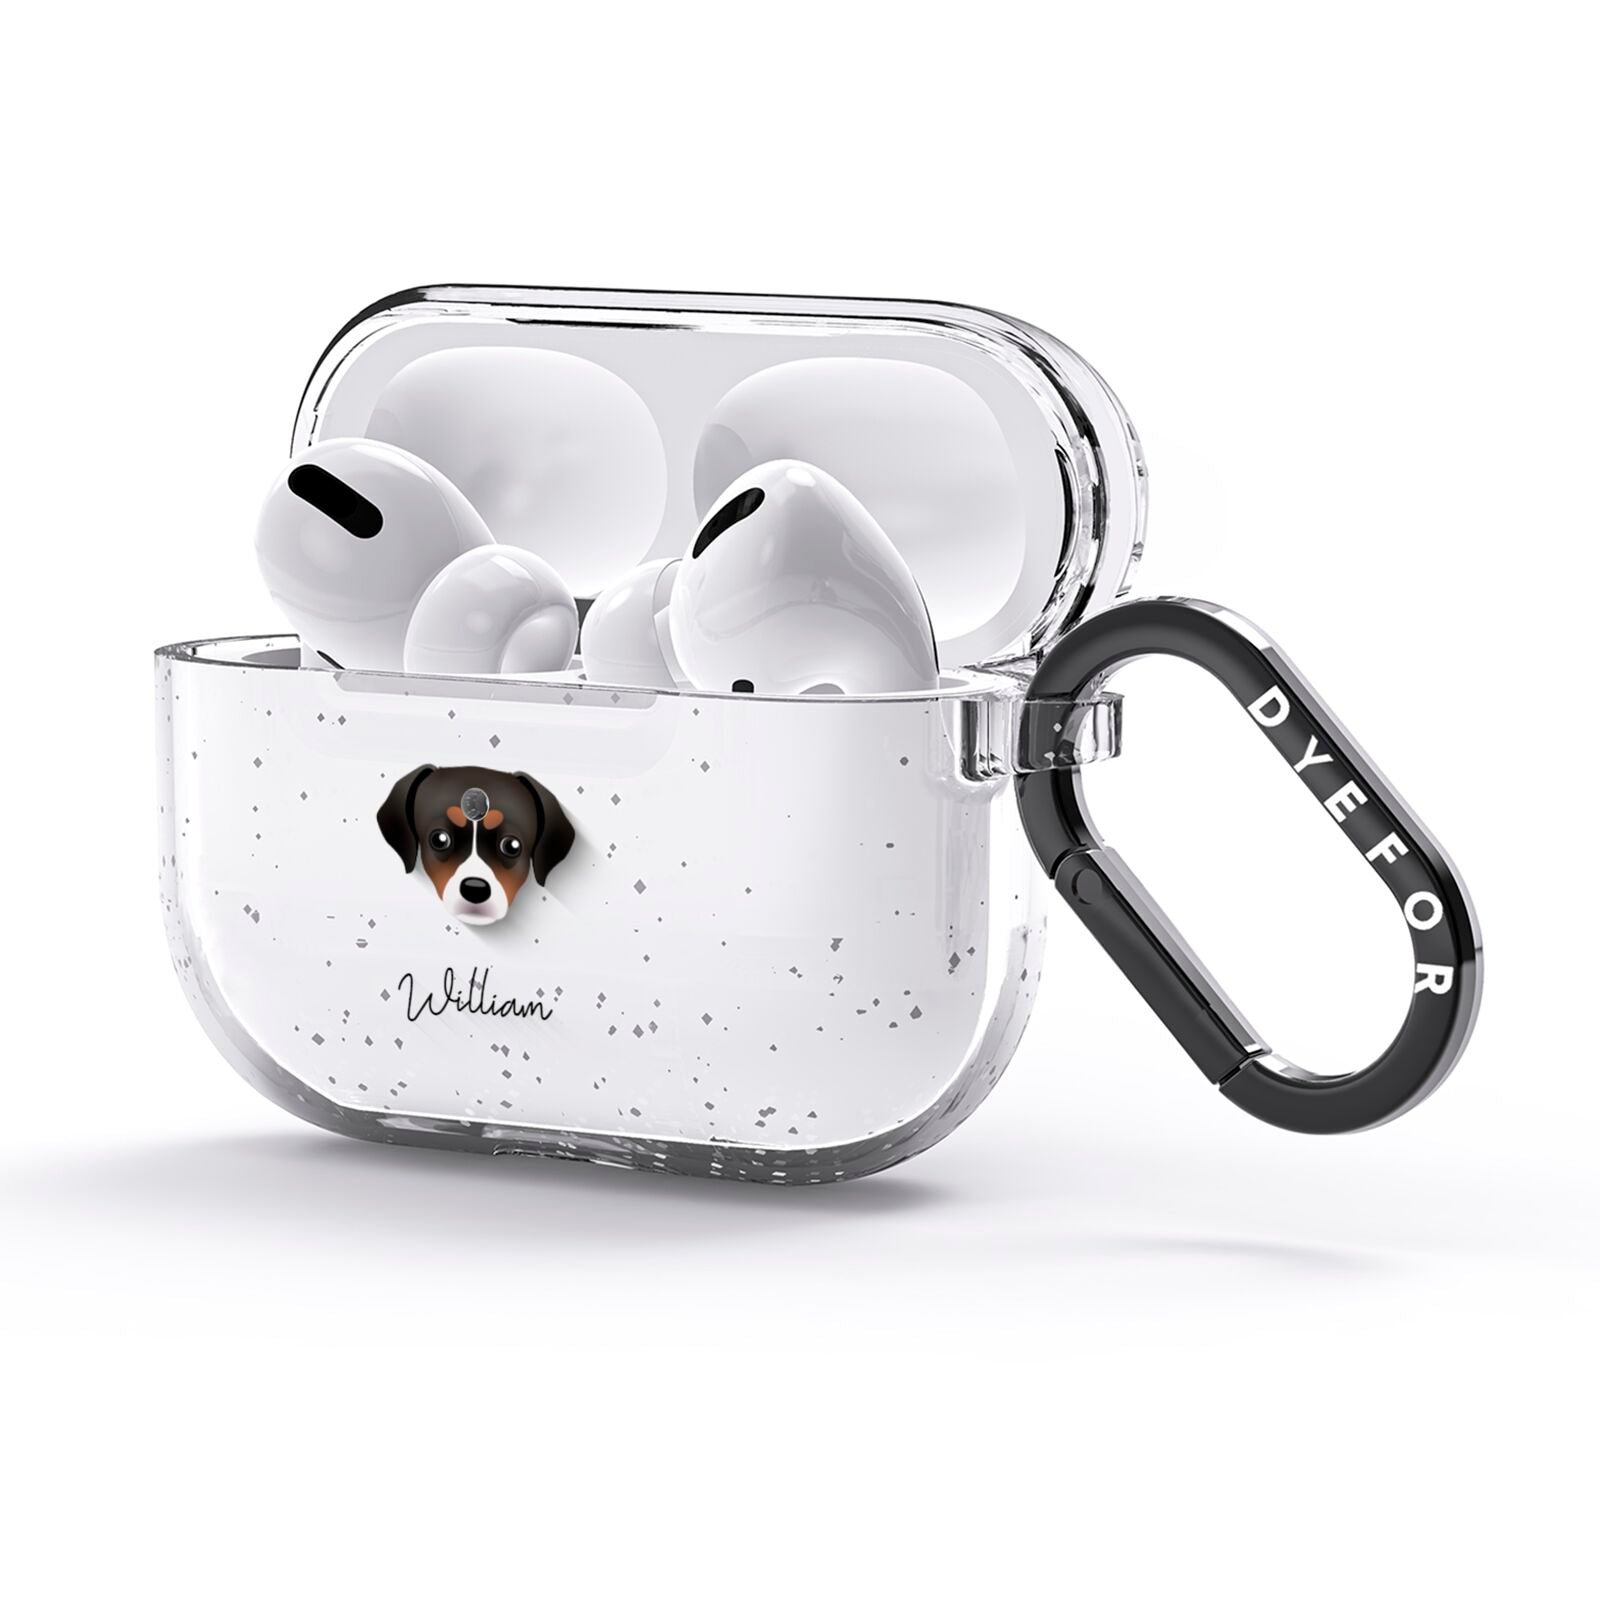 Cheagle Personalised AirPods Glitter Case 3rd Gen Side Image